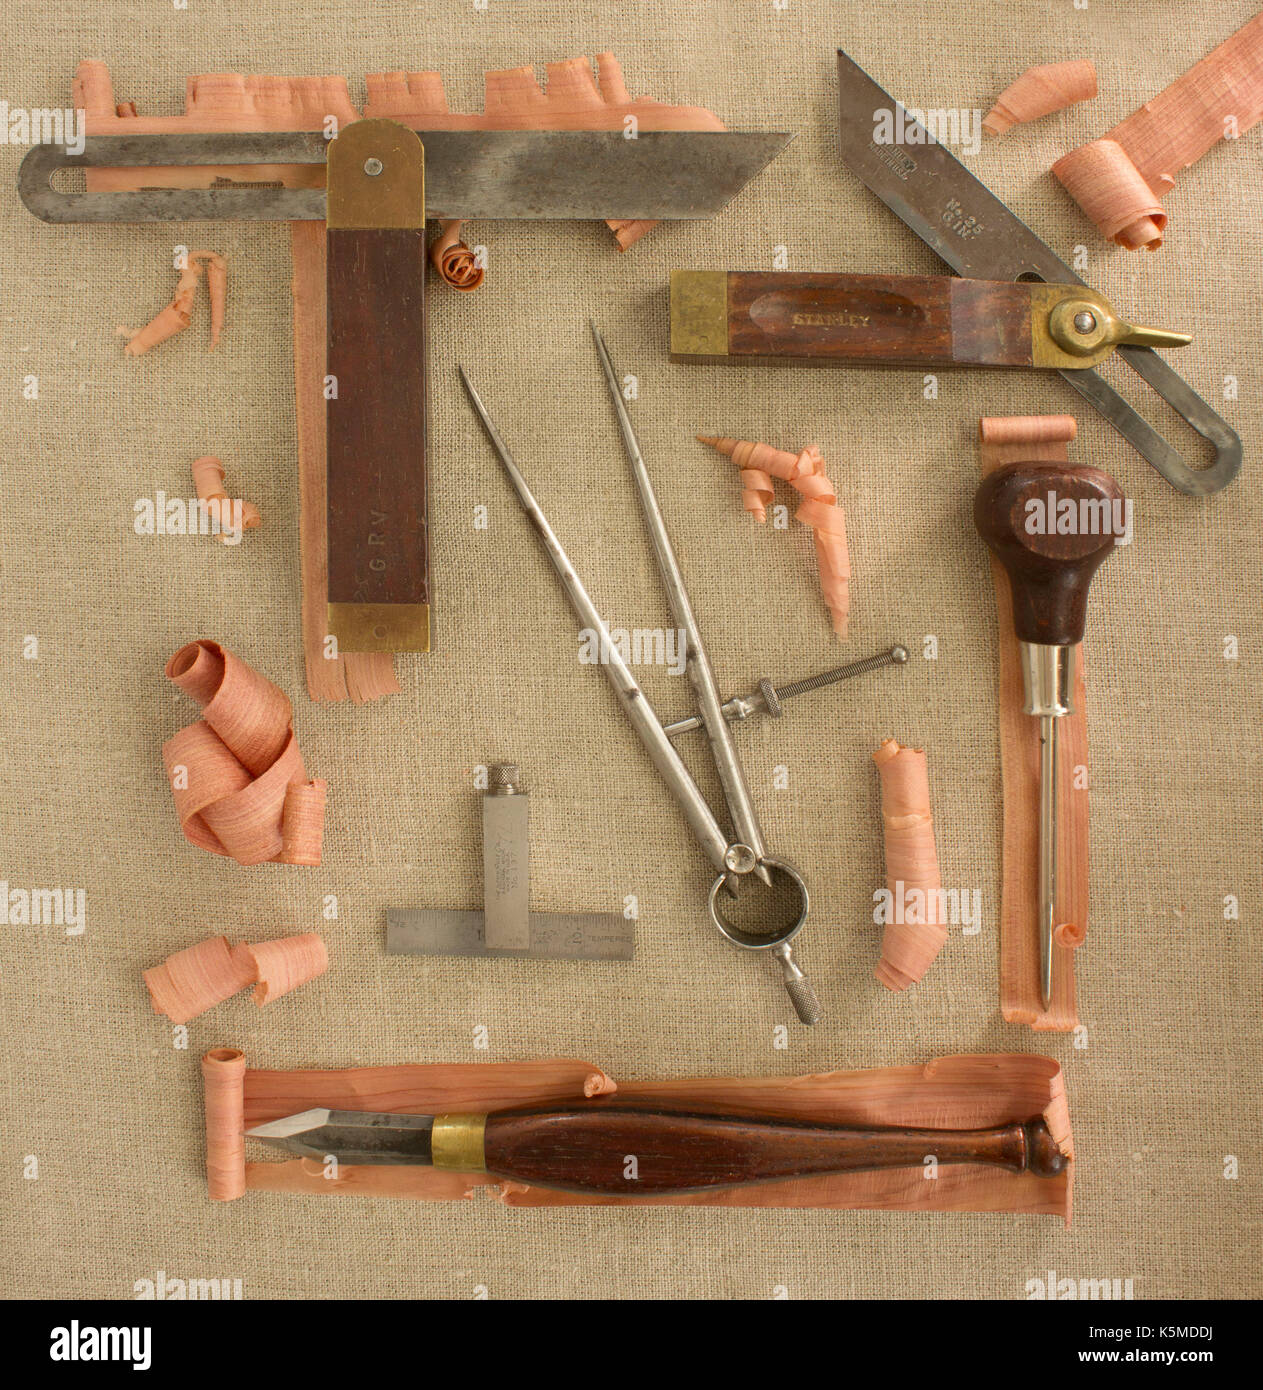 Still life of woodworking tools. Stock Photo